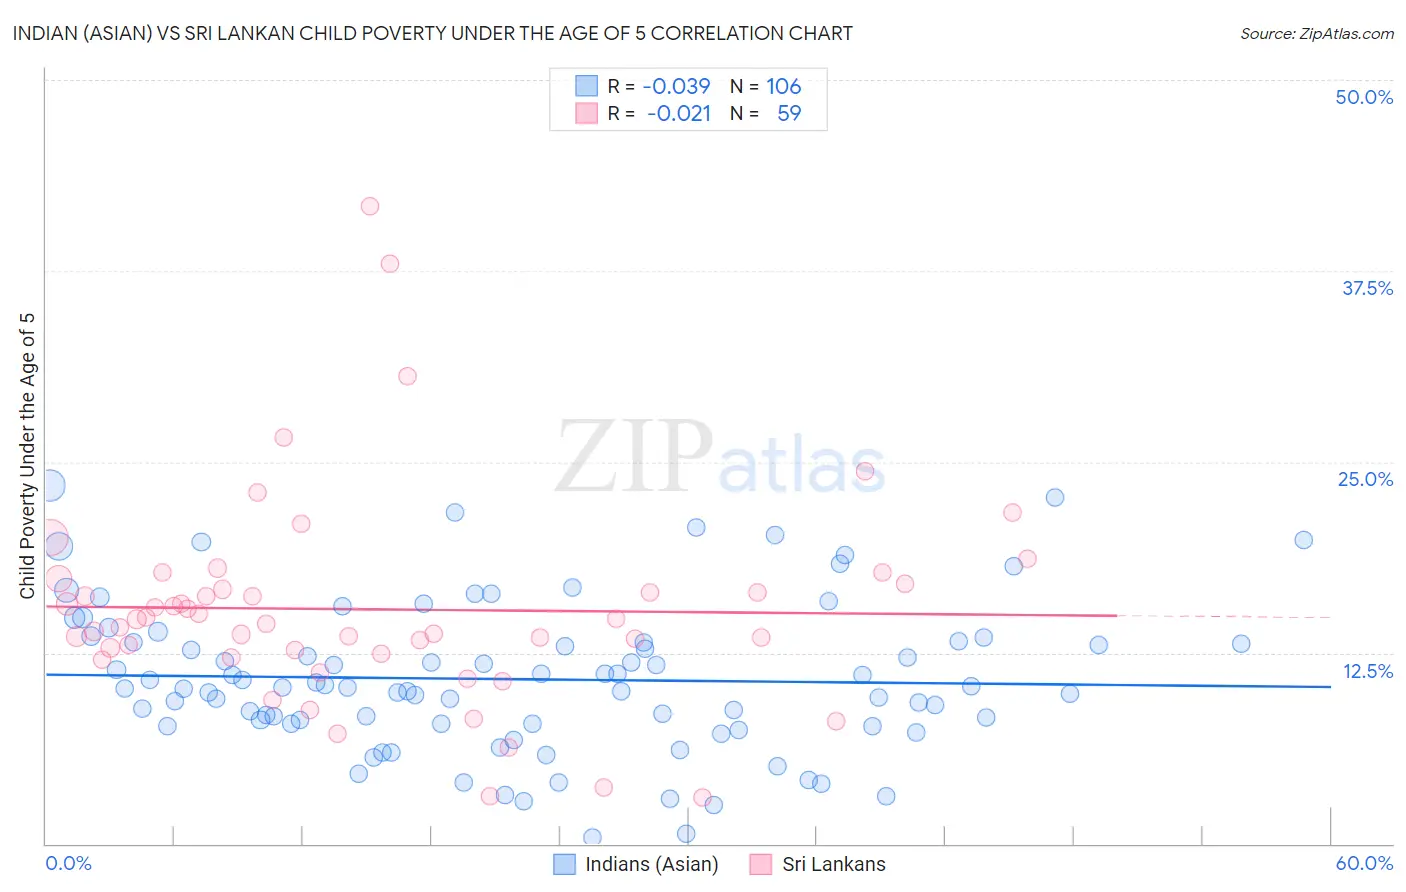 Indian (Asian) vs Sri Lankan Child Poverty Under the Age of 5